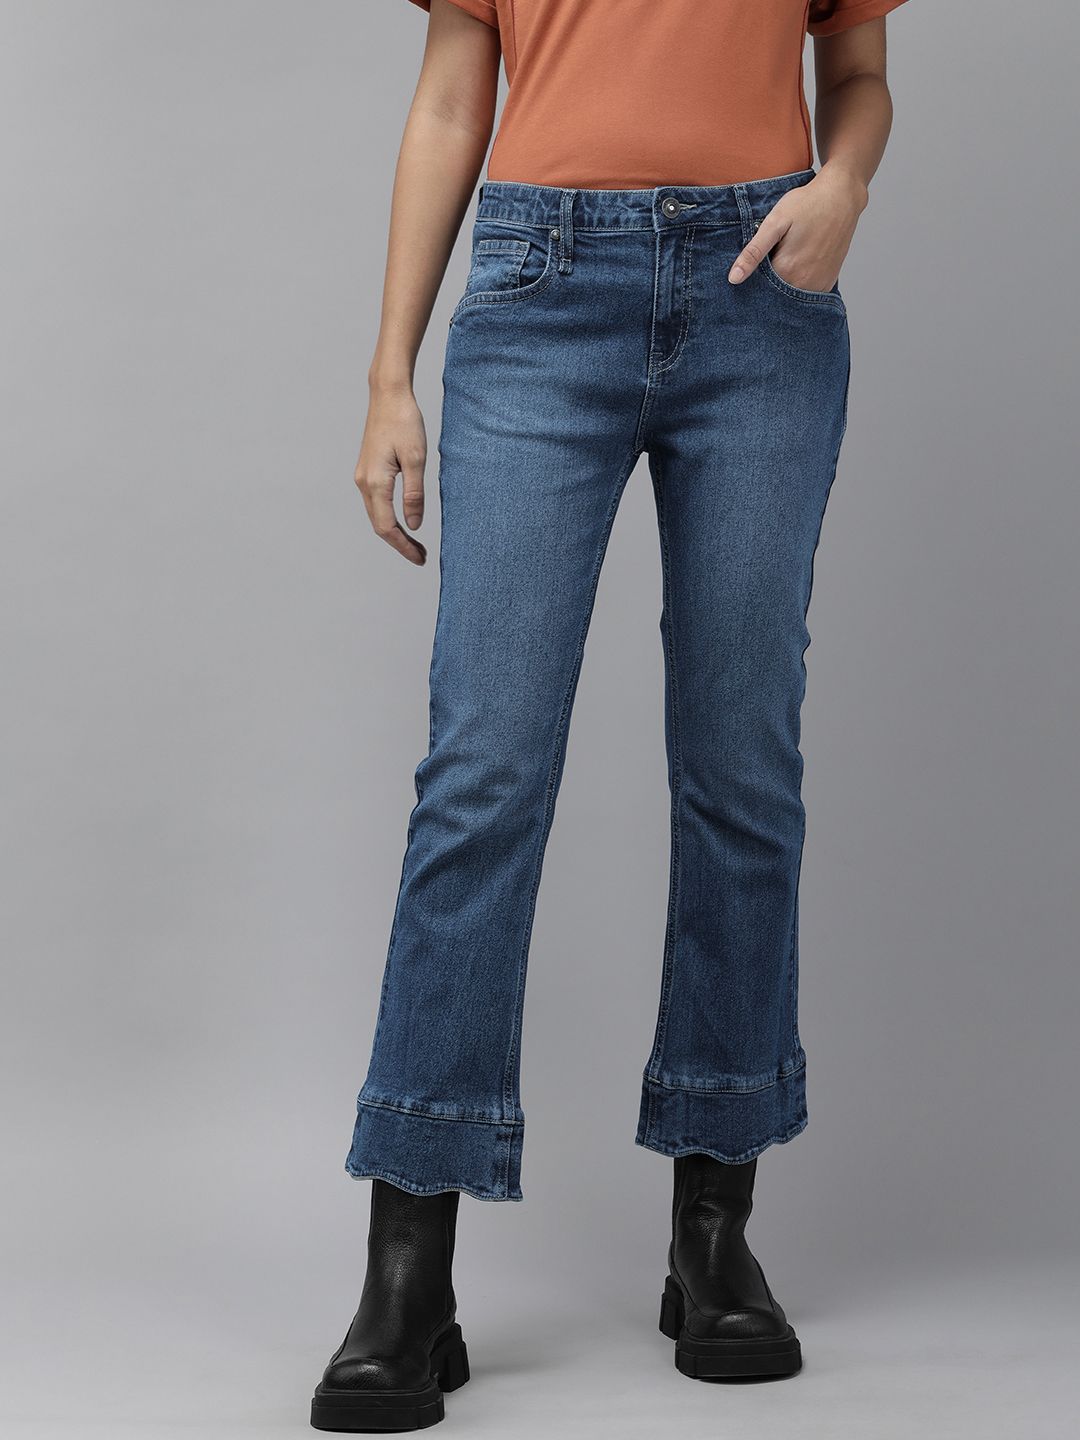 Roadster Women Blue Slim Bootcut Light Fade Stretchable Jeans Price in India